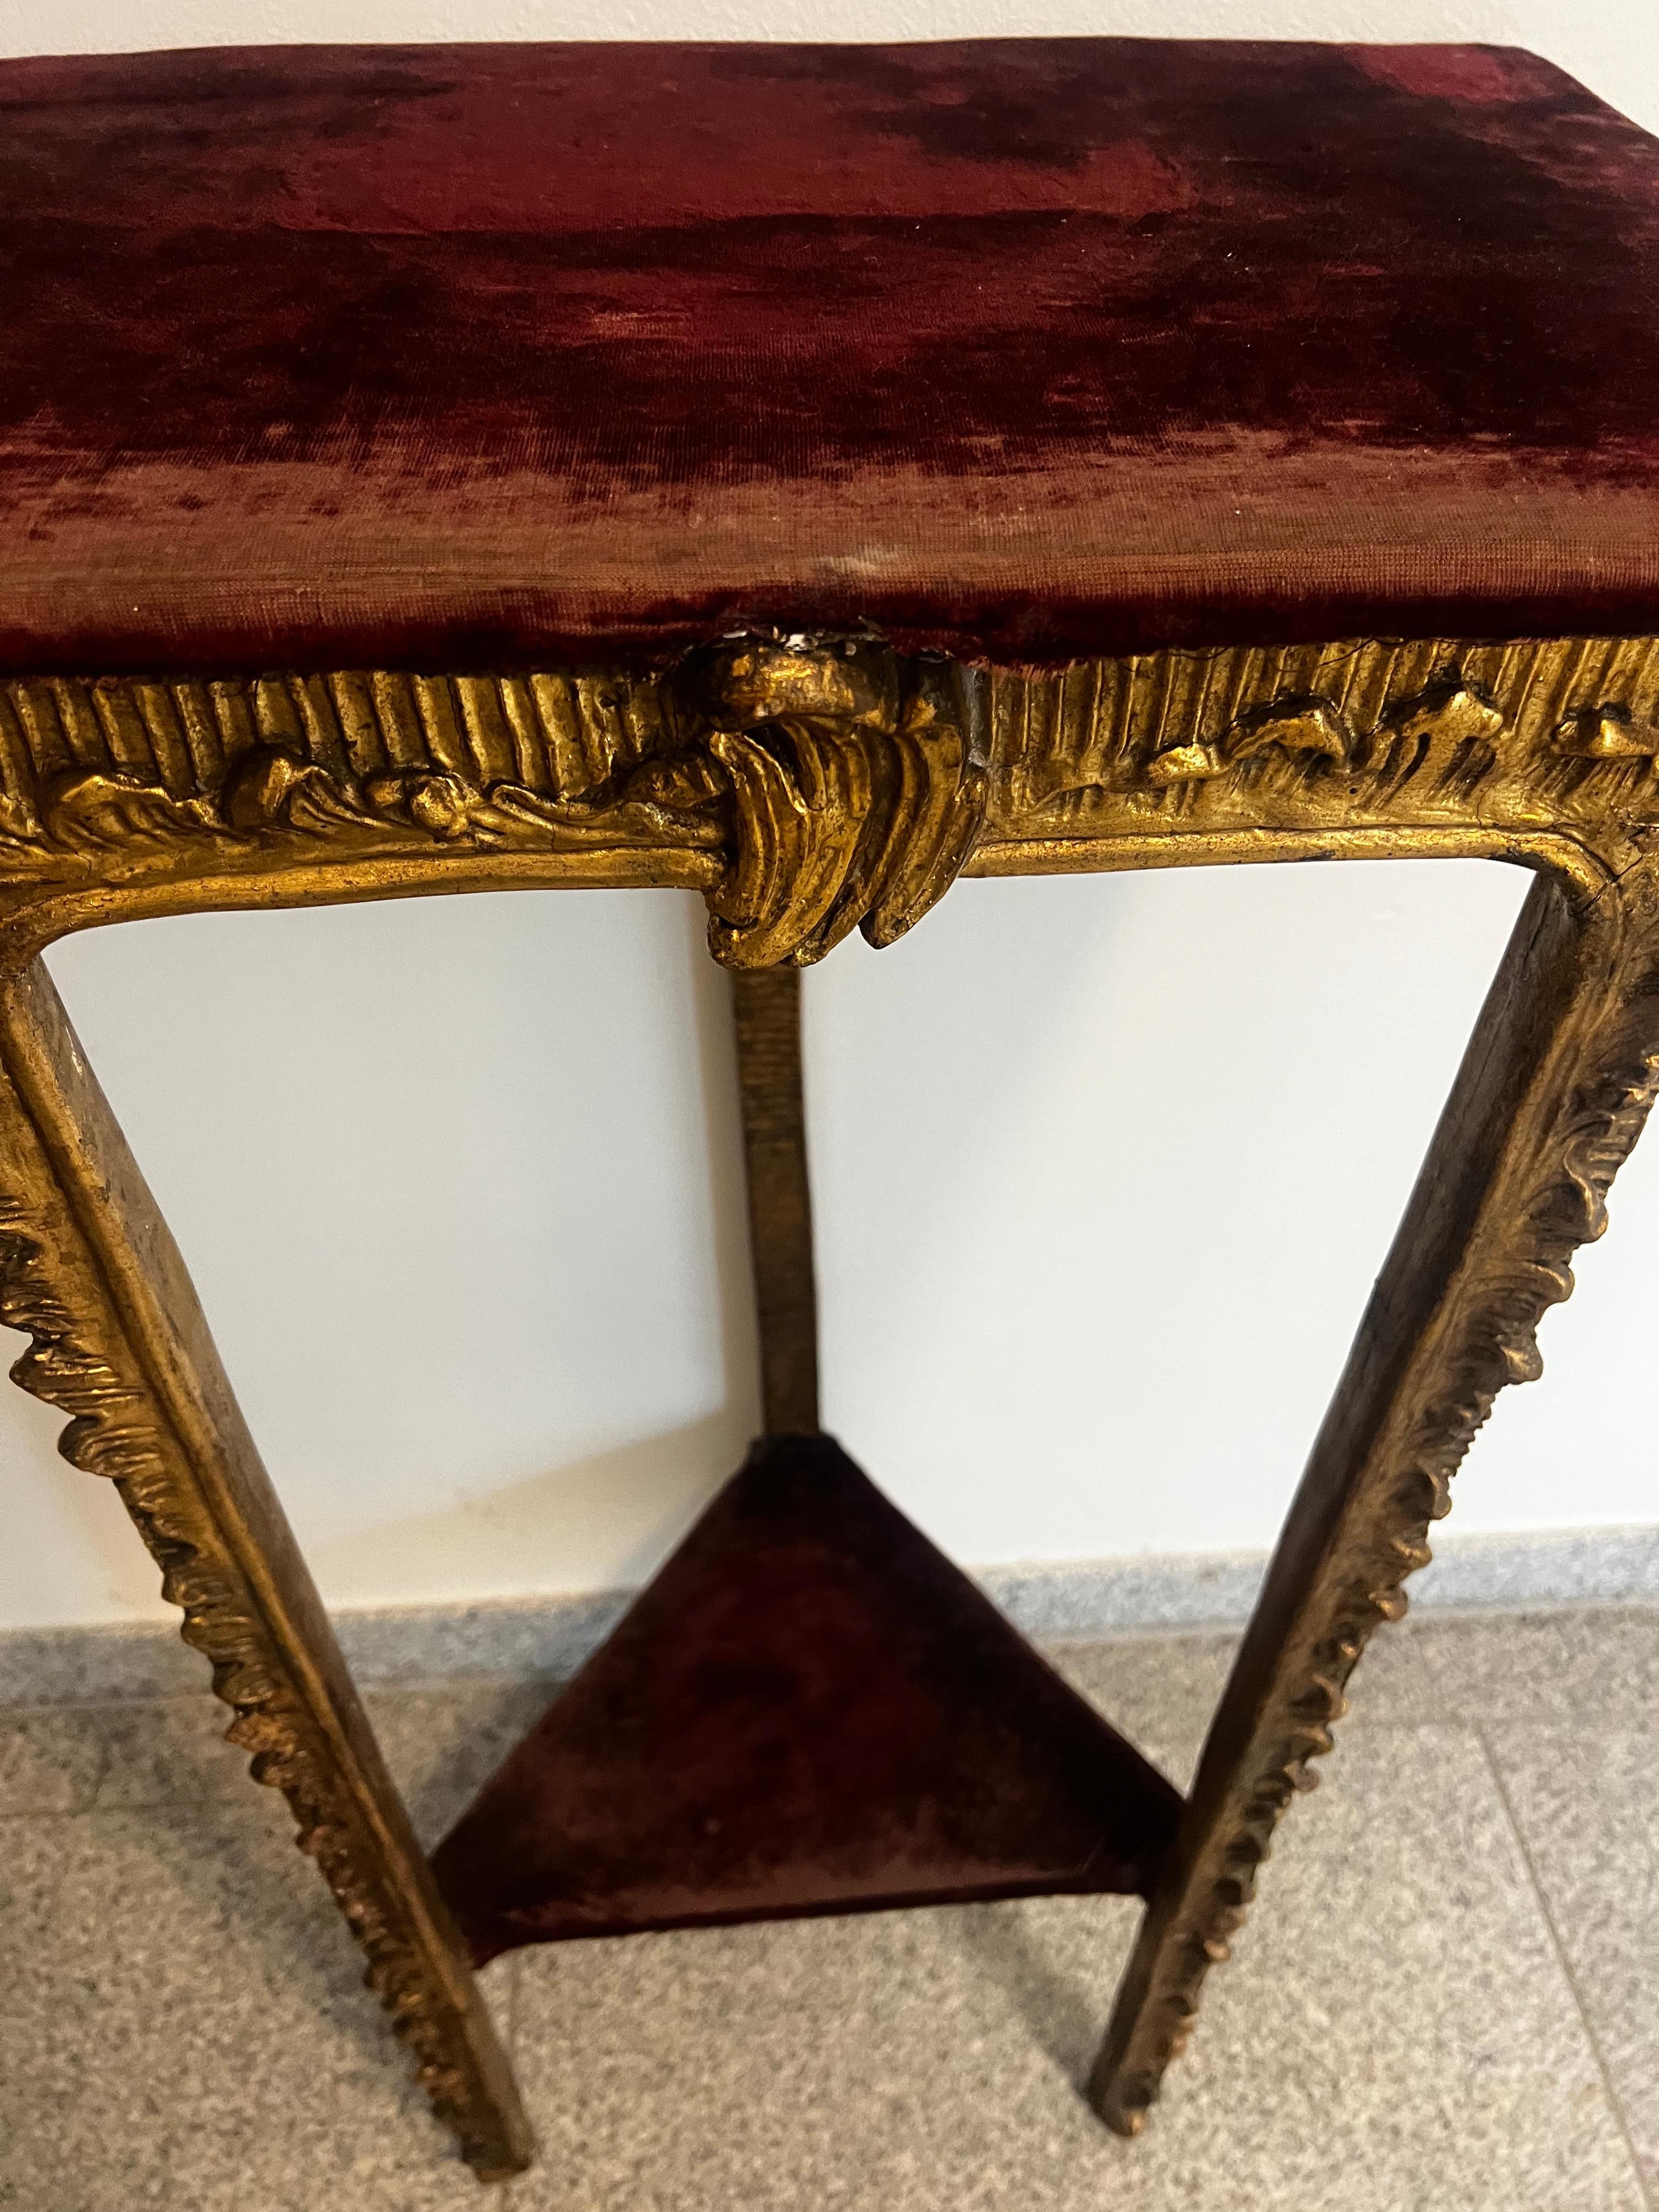 This is an extremely rare 3 leg Antique Venetian Console Table is in a wonderful condition and is very stable. It is a great way to display your Item of any kind, whether it is a Sculpture or a Vase.
The Top of the Table has an Original Venetian